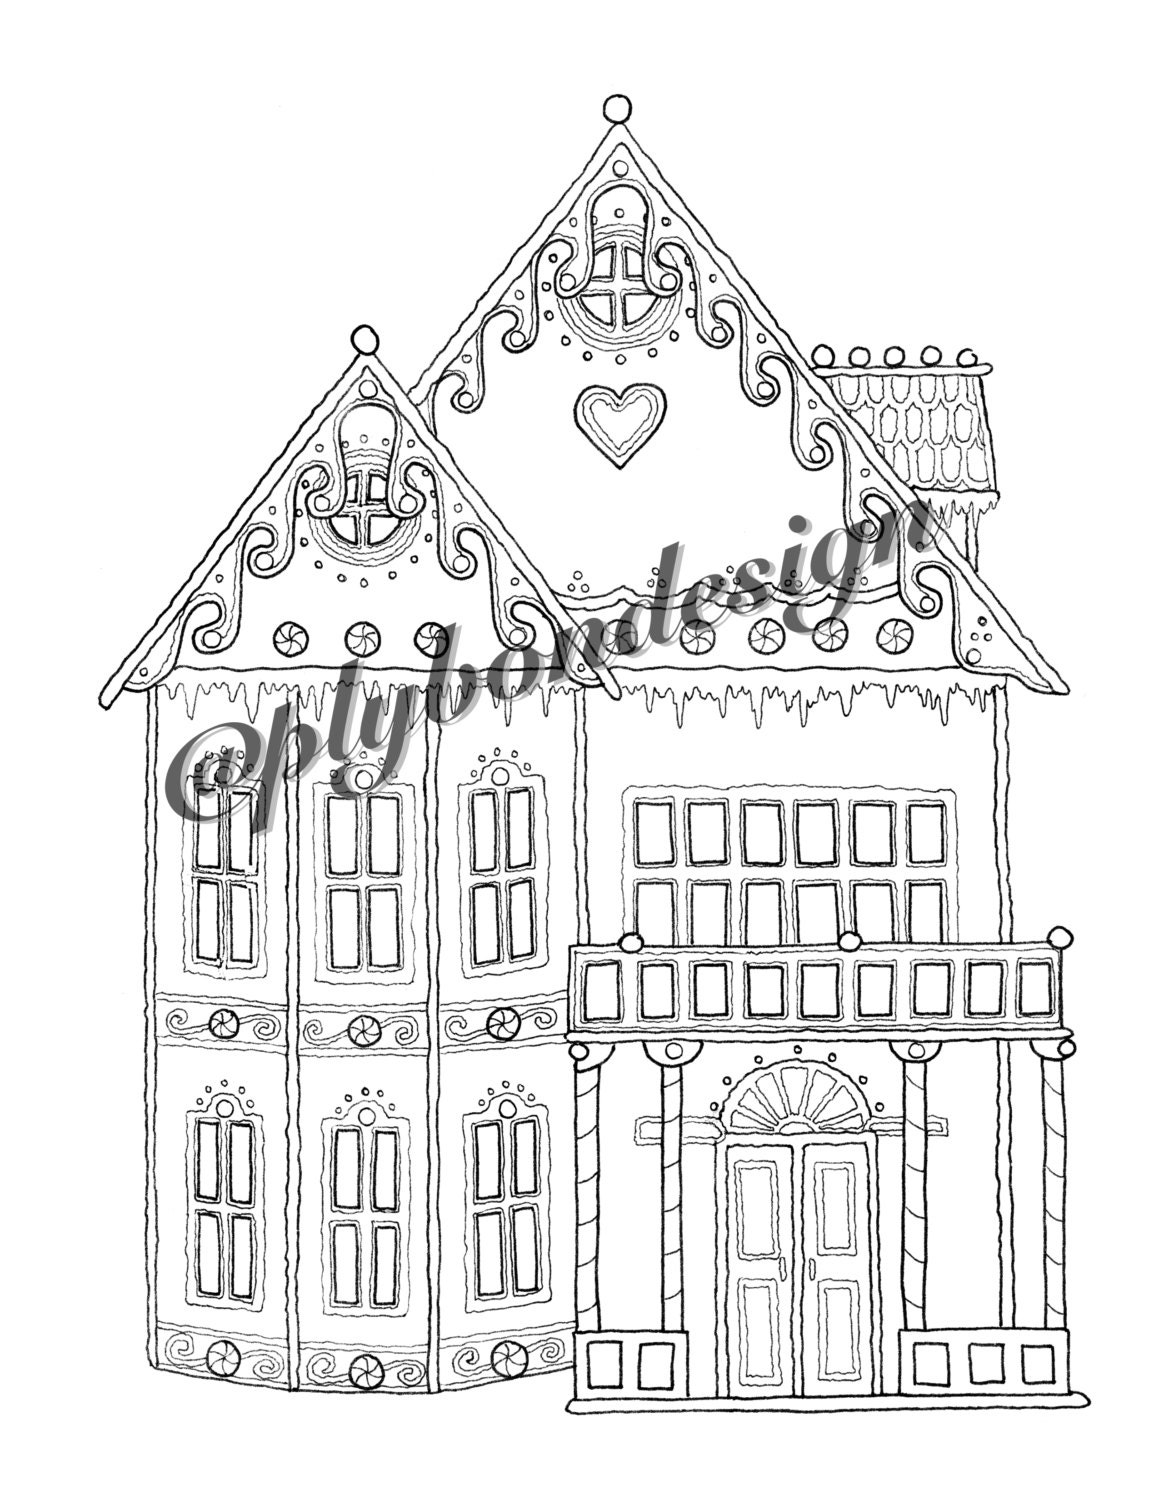 Gingerbread house coloring page digital download